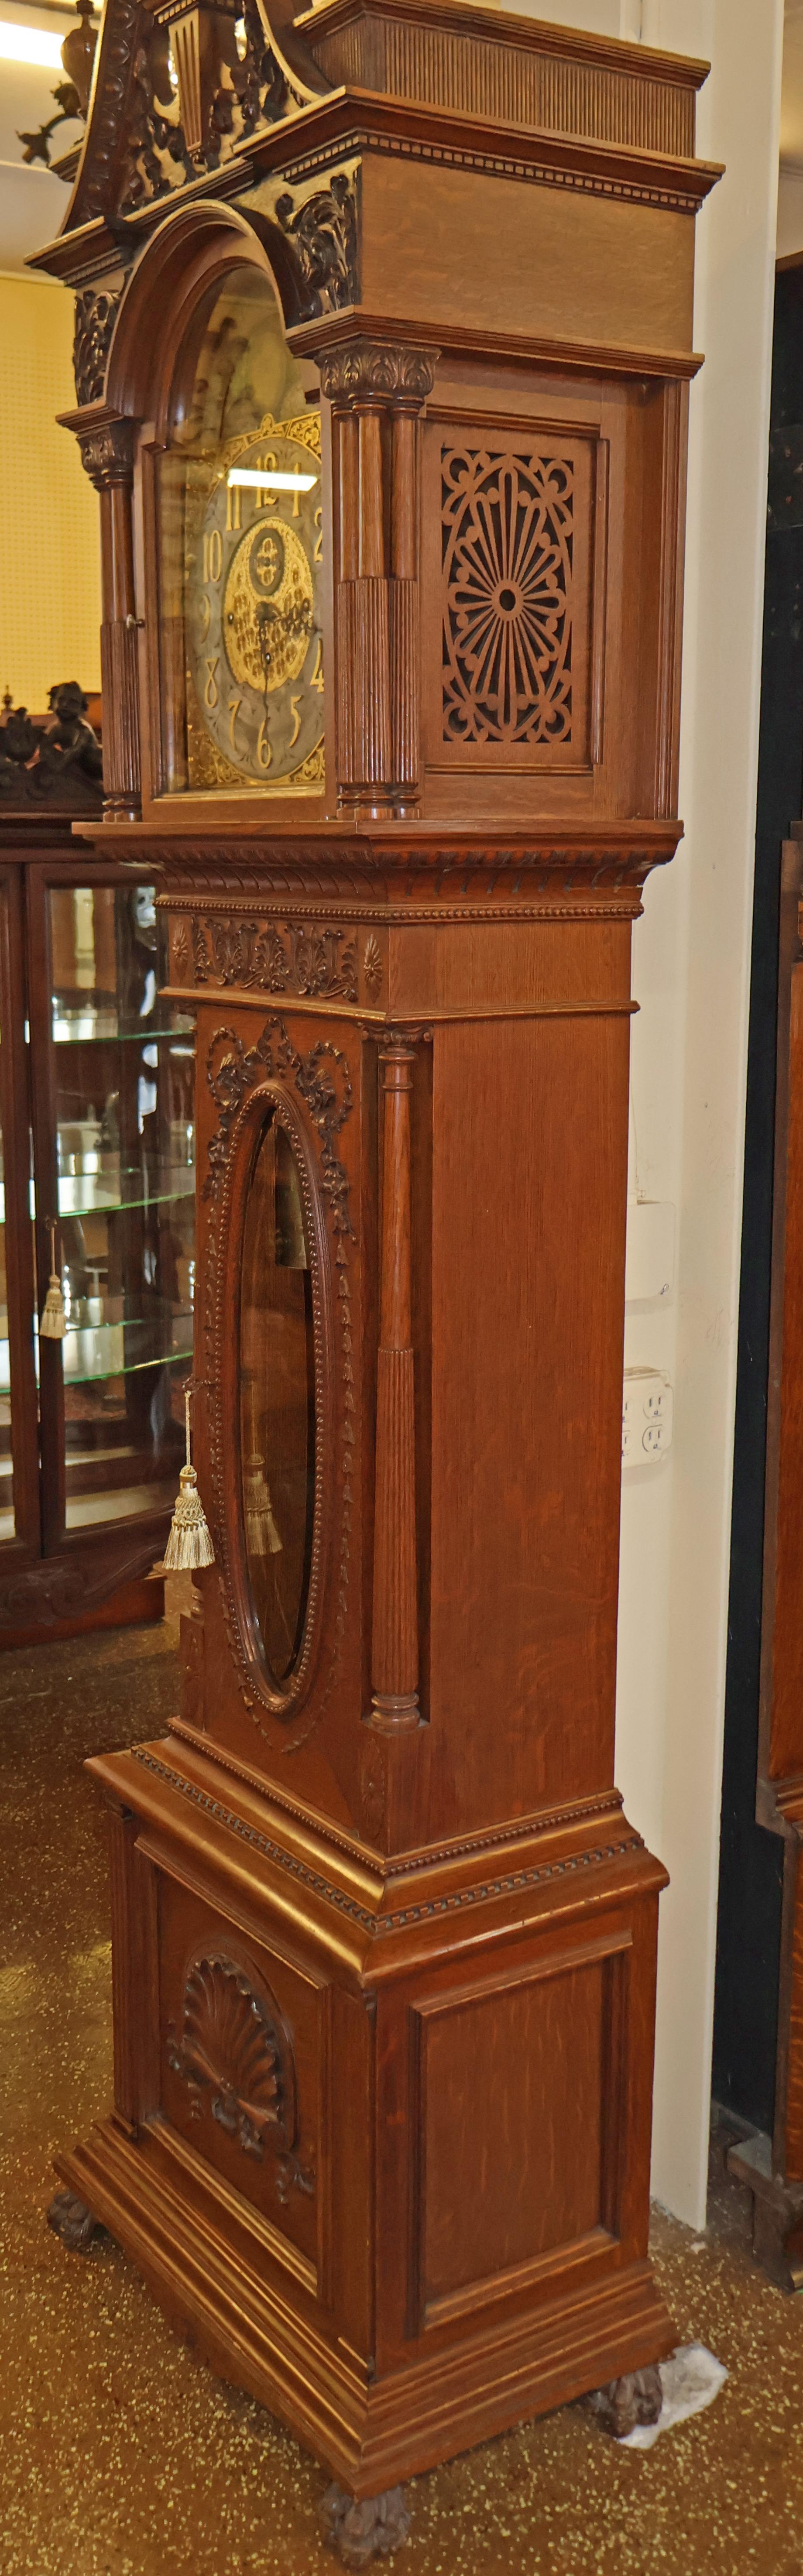 19th Century Tiffany & CO Oak 5 Musical 5 Gong Tall Case Grandfather Clock In Good Condition For Sale In Long Branch, NJ